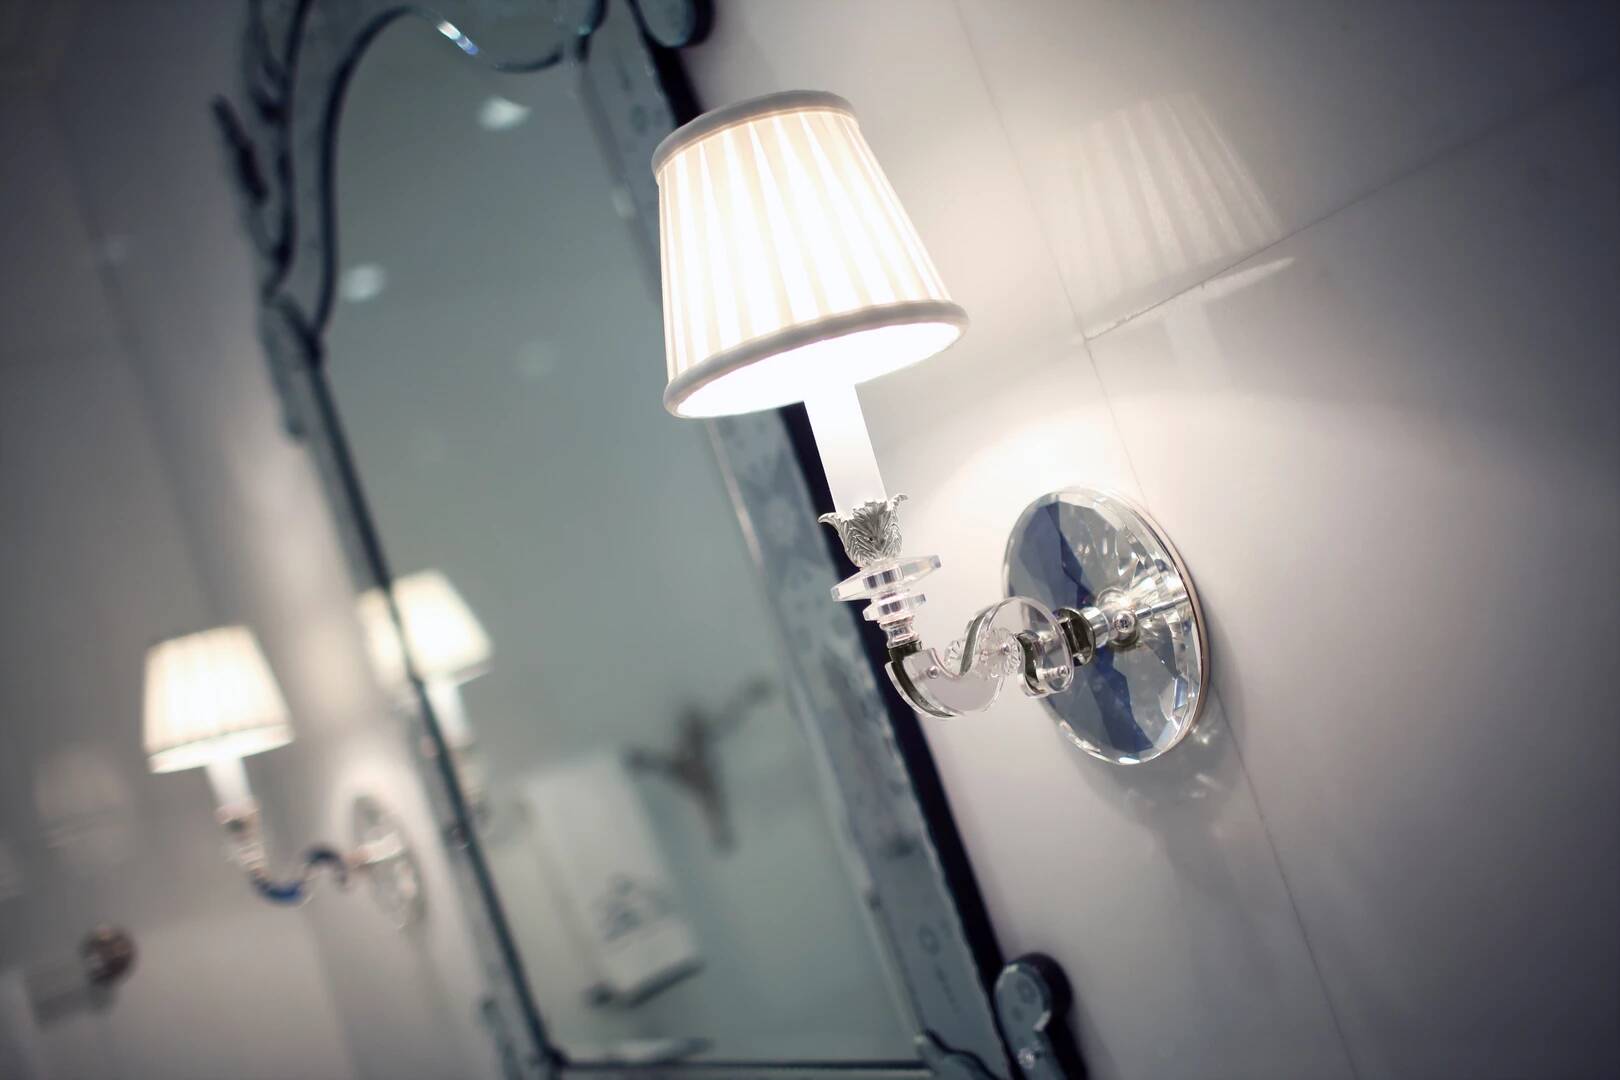 Lighting systems in the bathroom